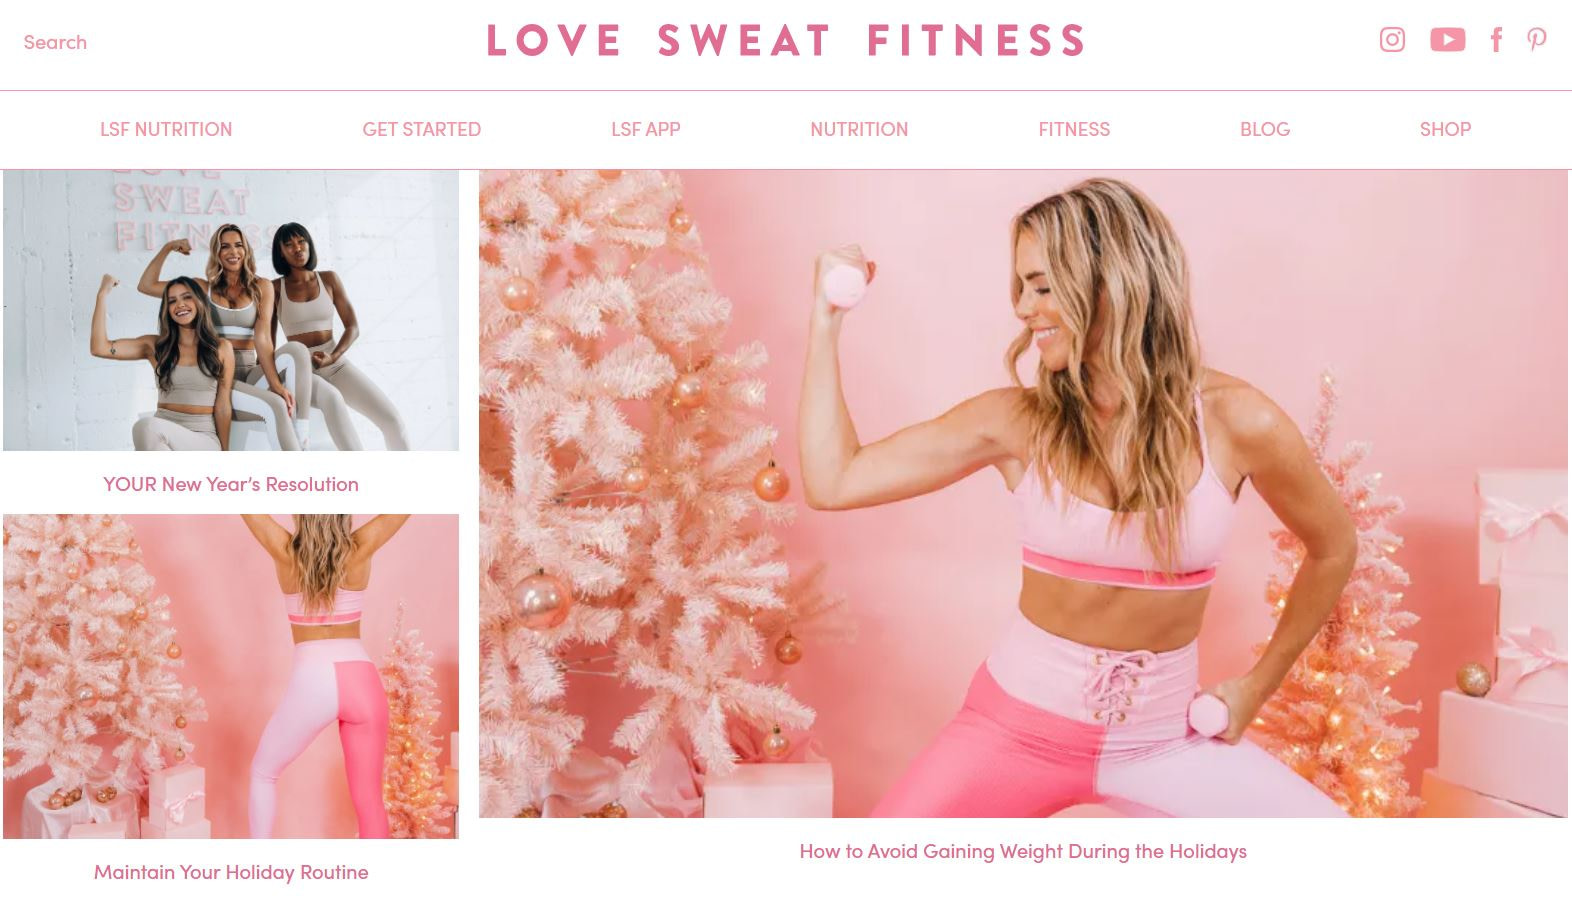 Love Sweat Fitness blog is in one of the most profitable blog niches -  fitness.